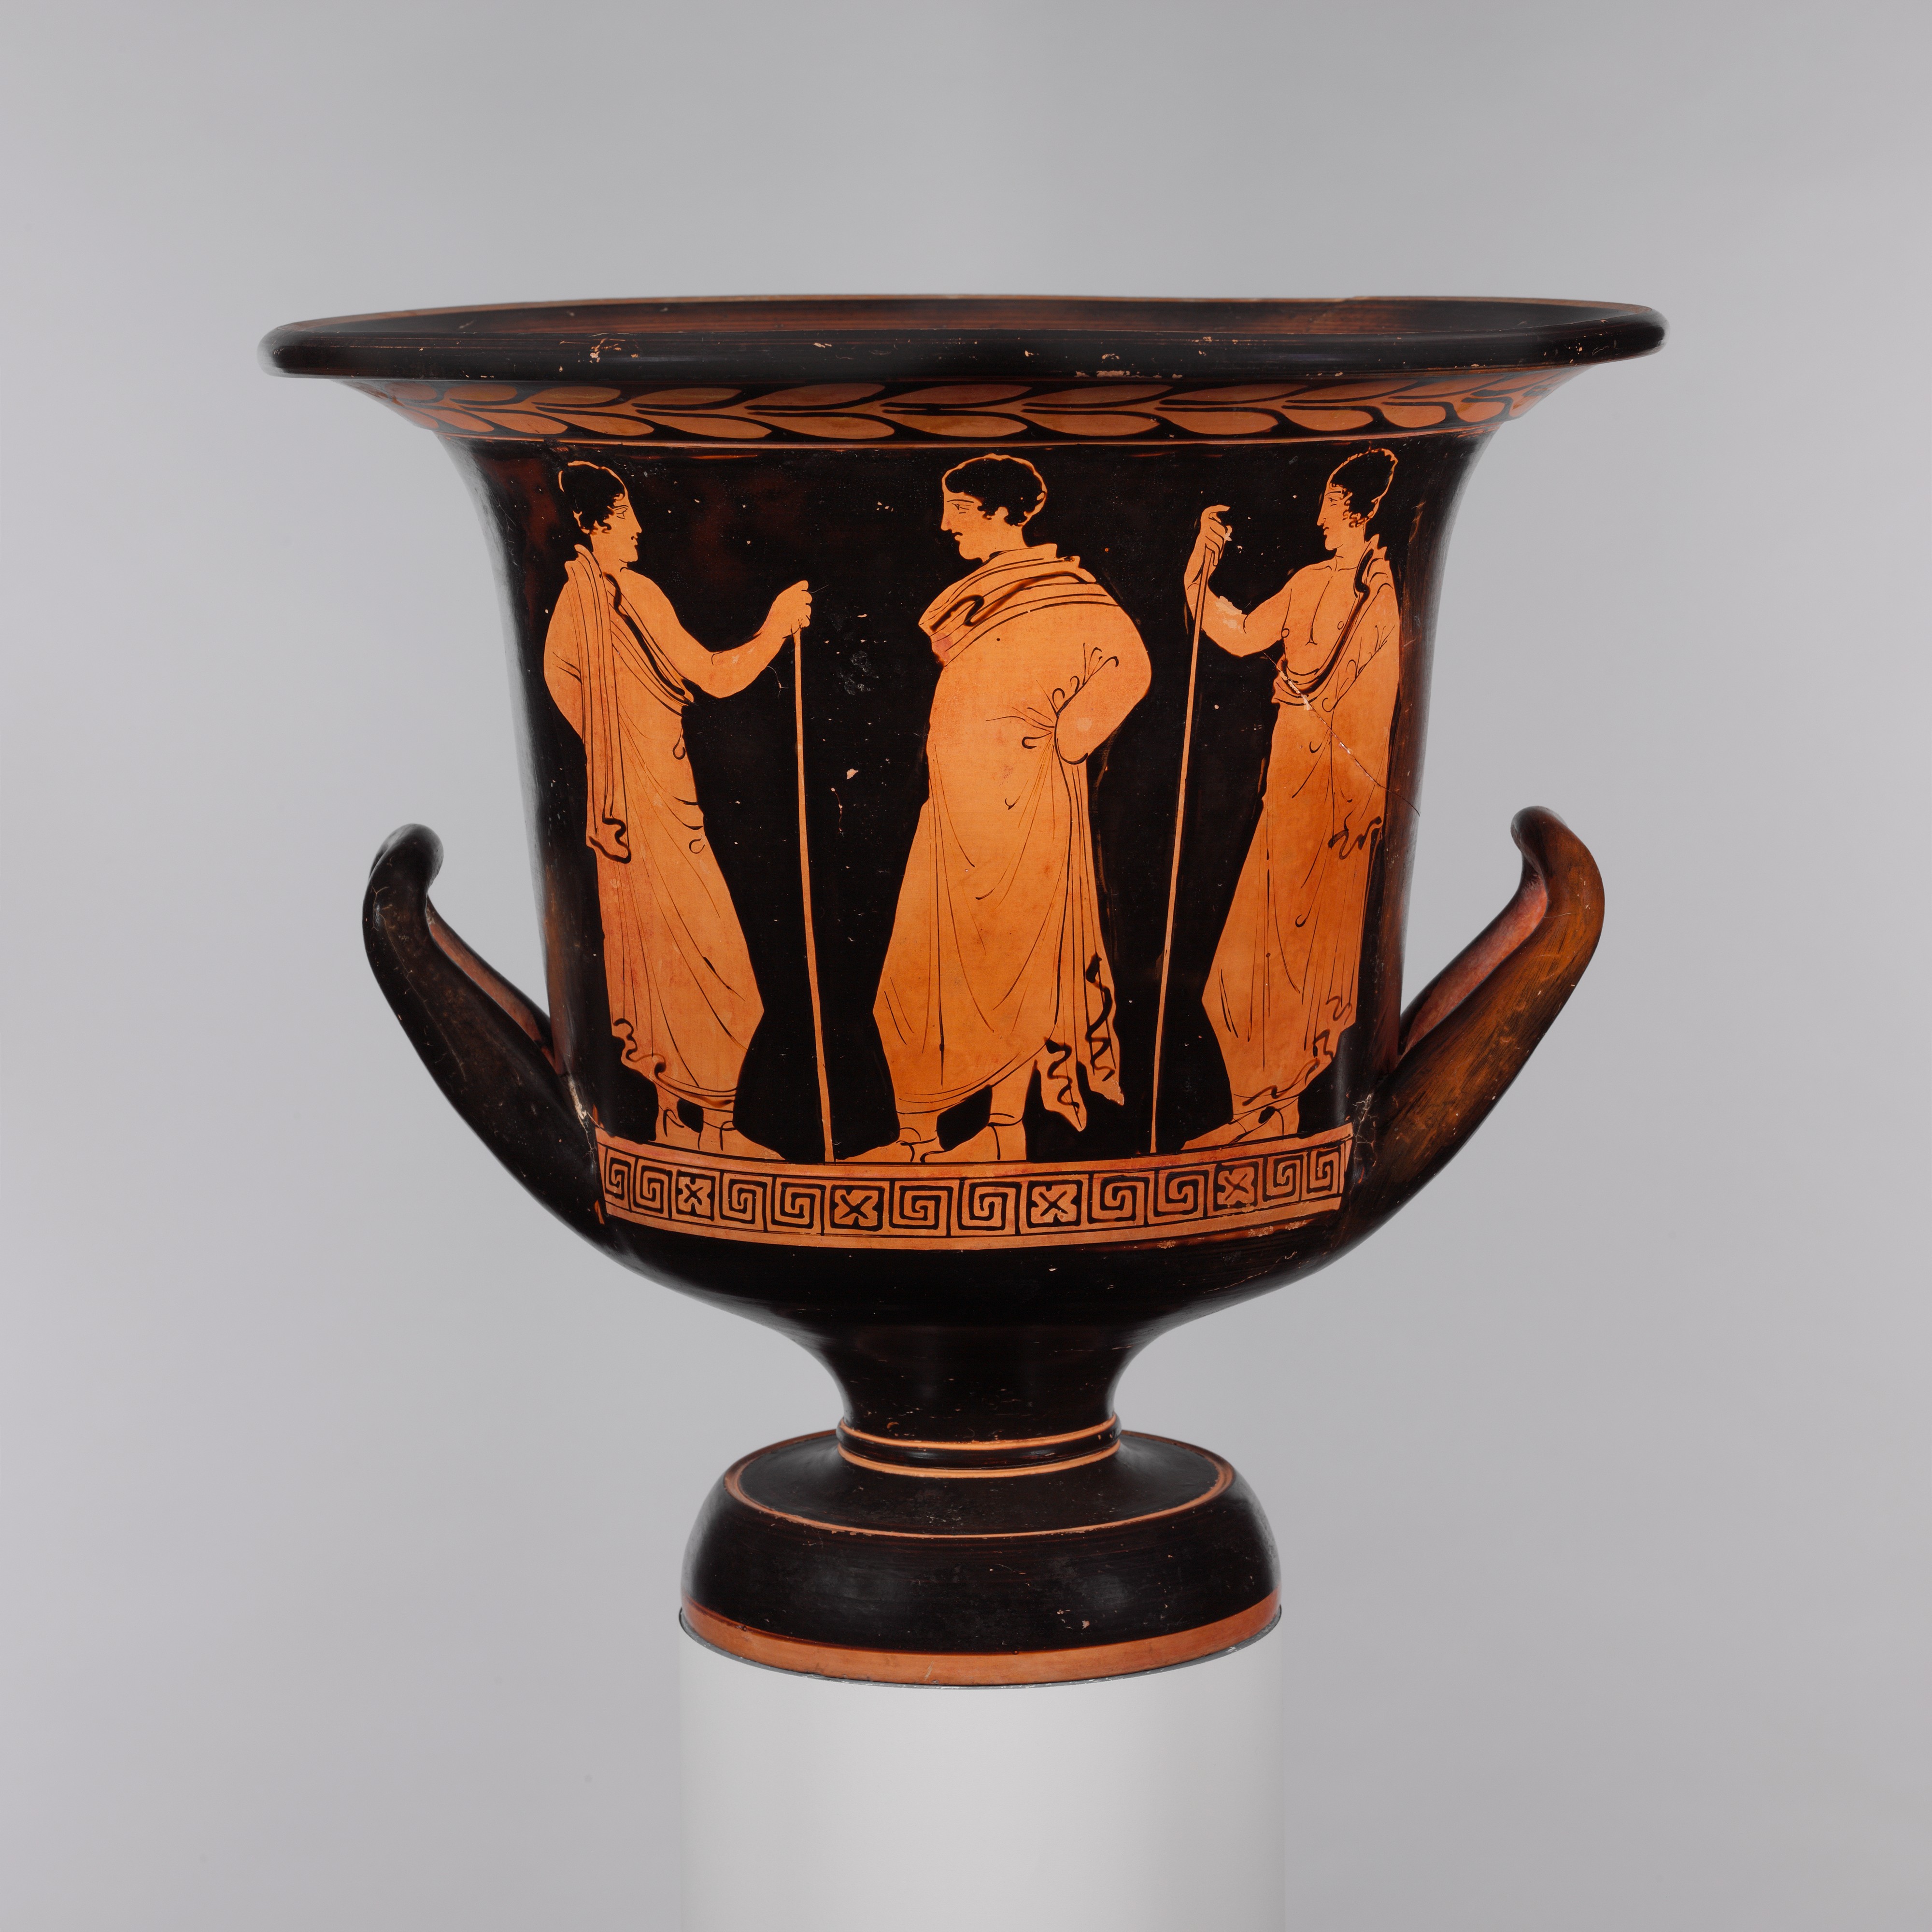 Attributed to the Dolon Painter | Terracotta calyx-krater (mixing bowl) | Greek, Italian, Lucanian | Late Classical | The Metropolitan Museum of Art